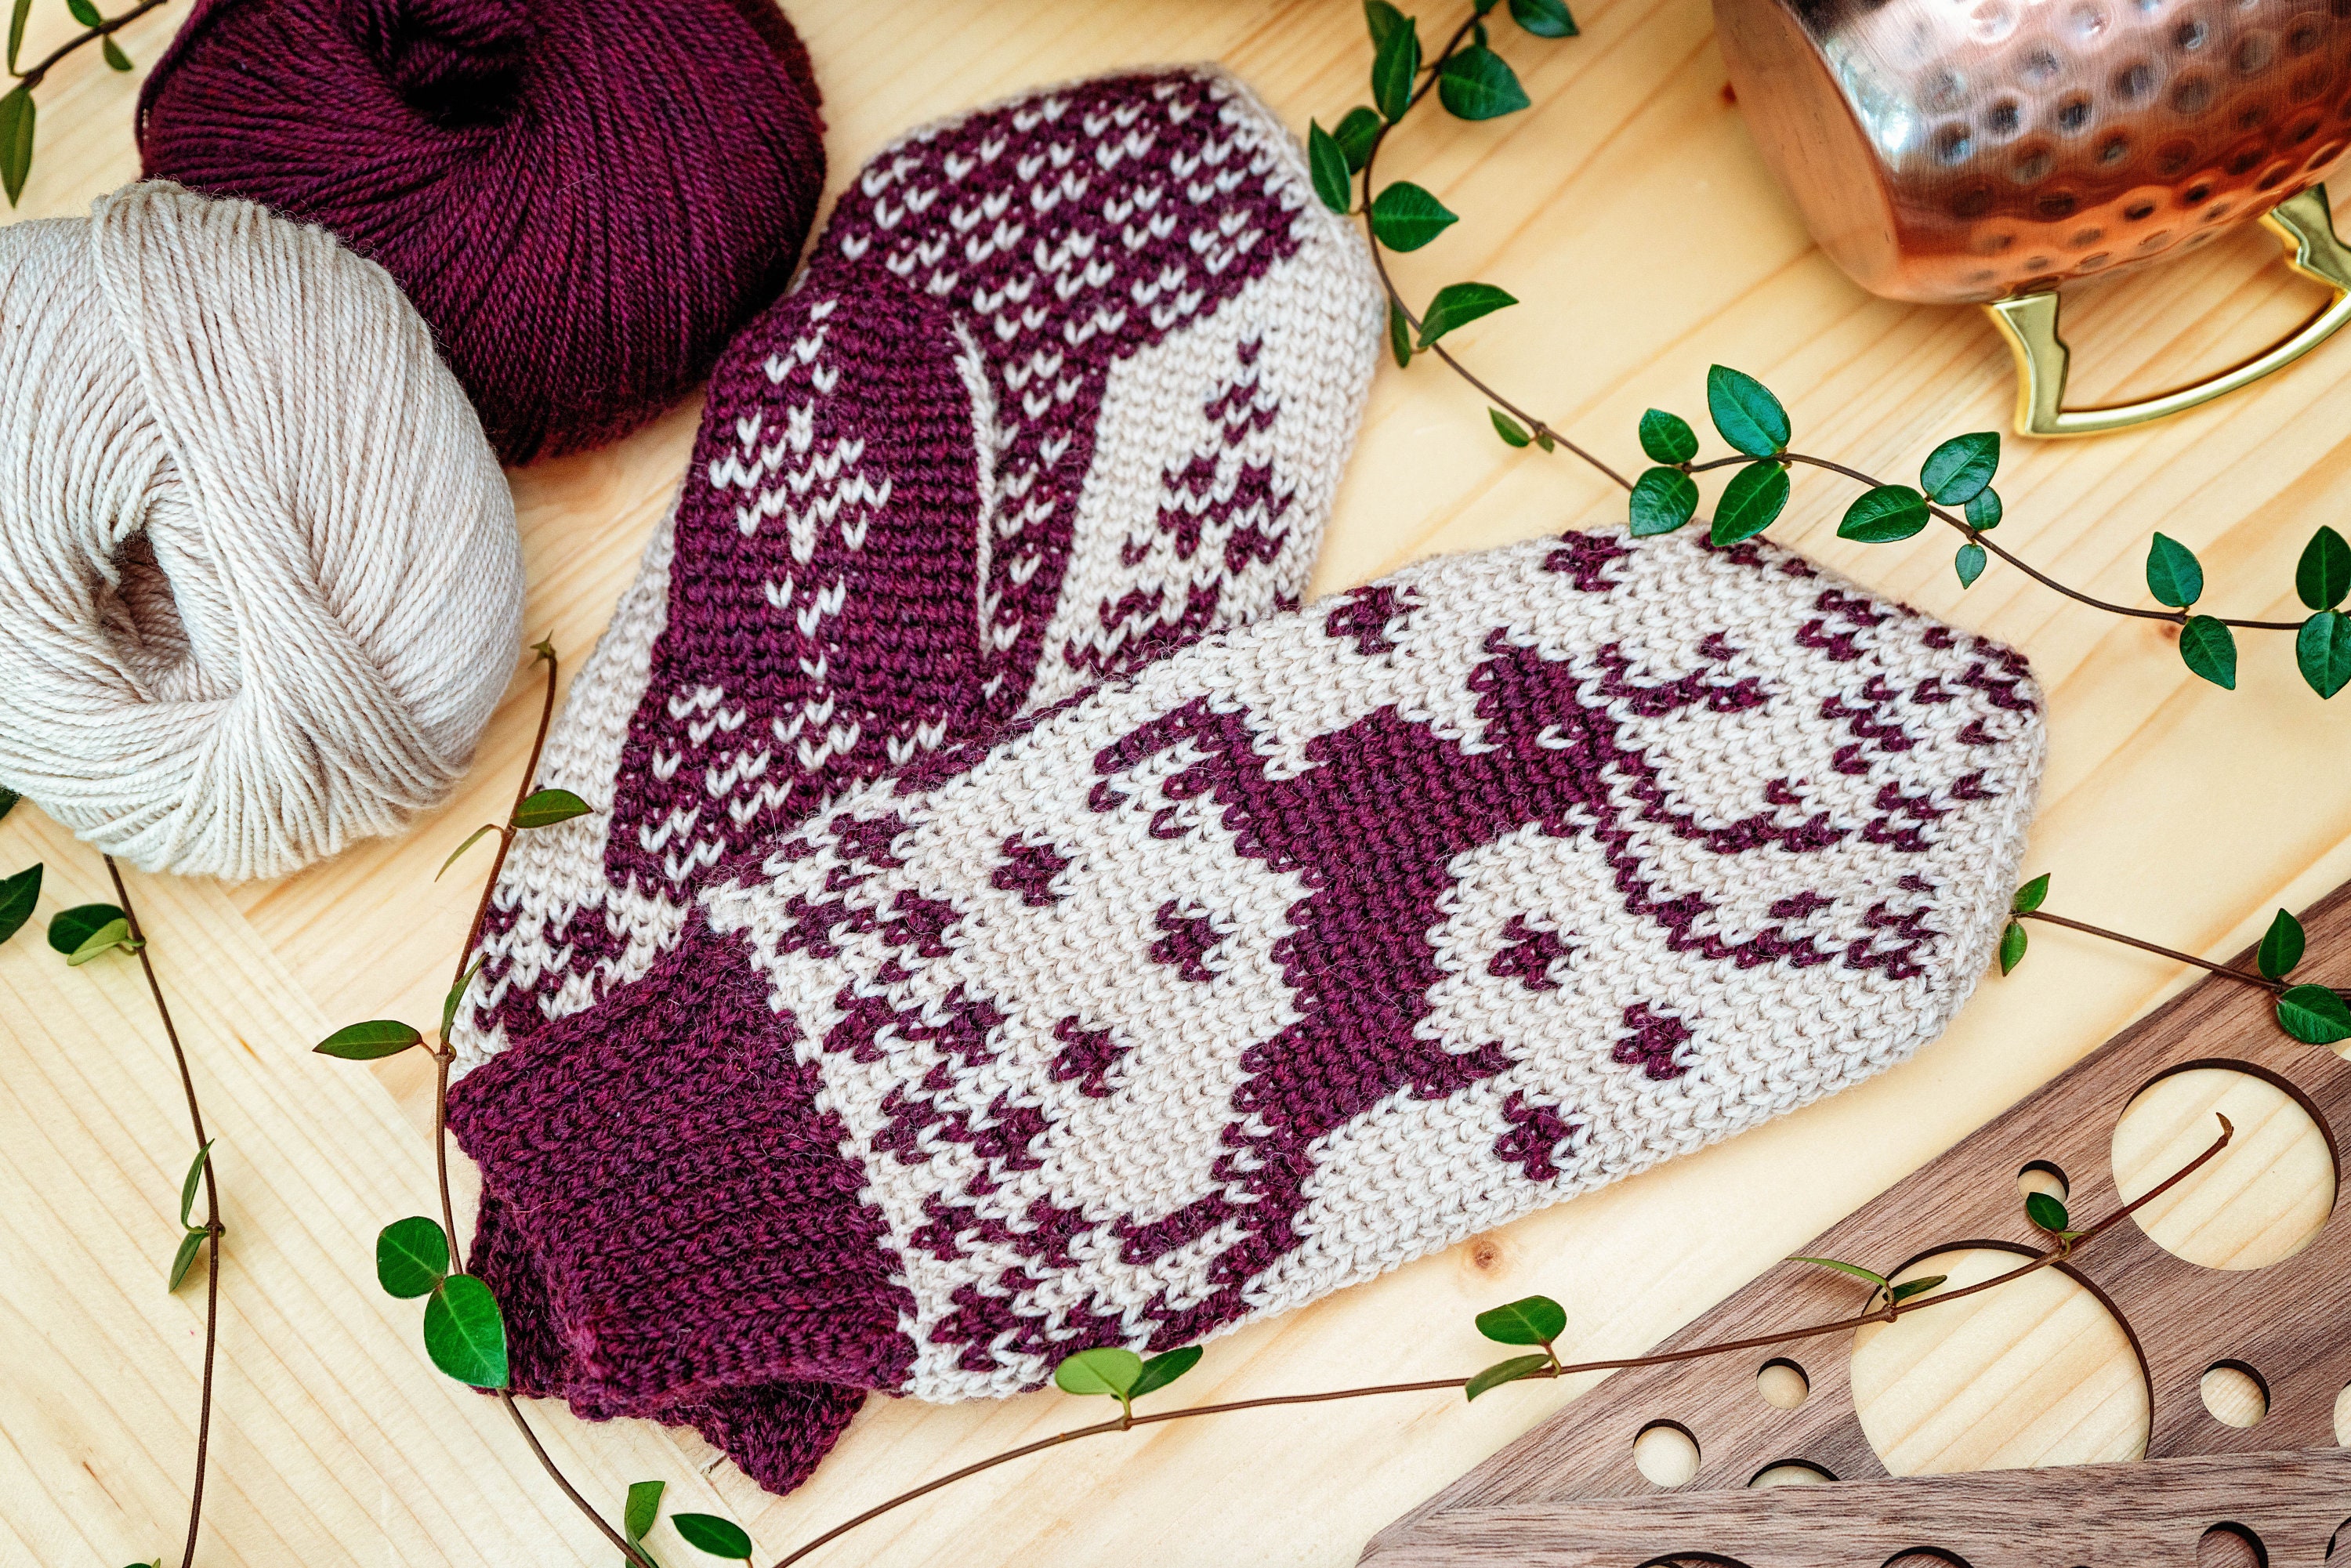 15 Crochet Gloves & Mittens Patterns to Whip Up This Winter